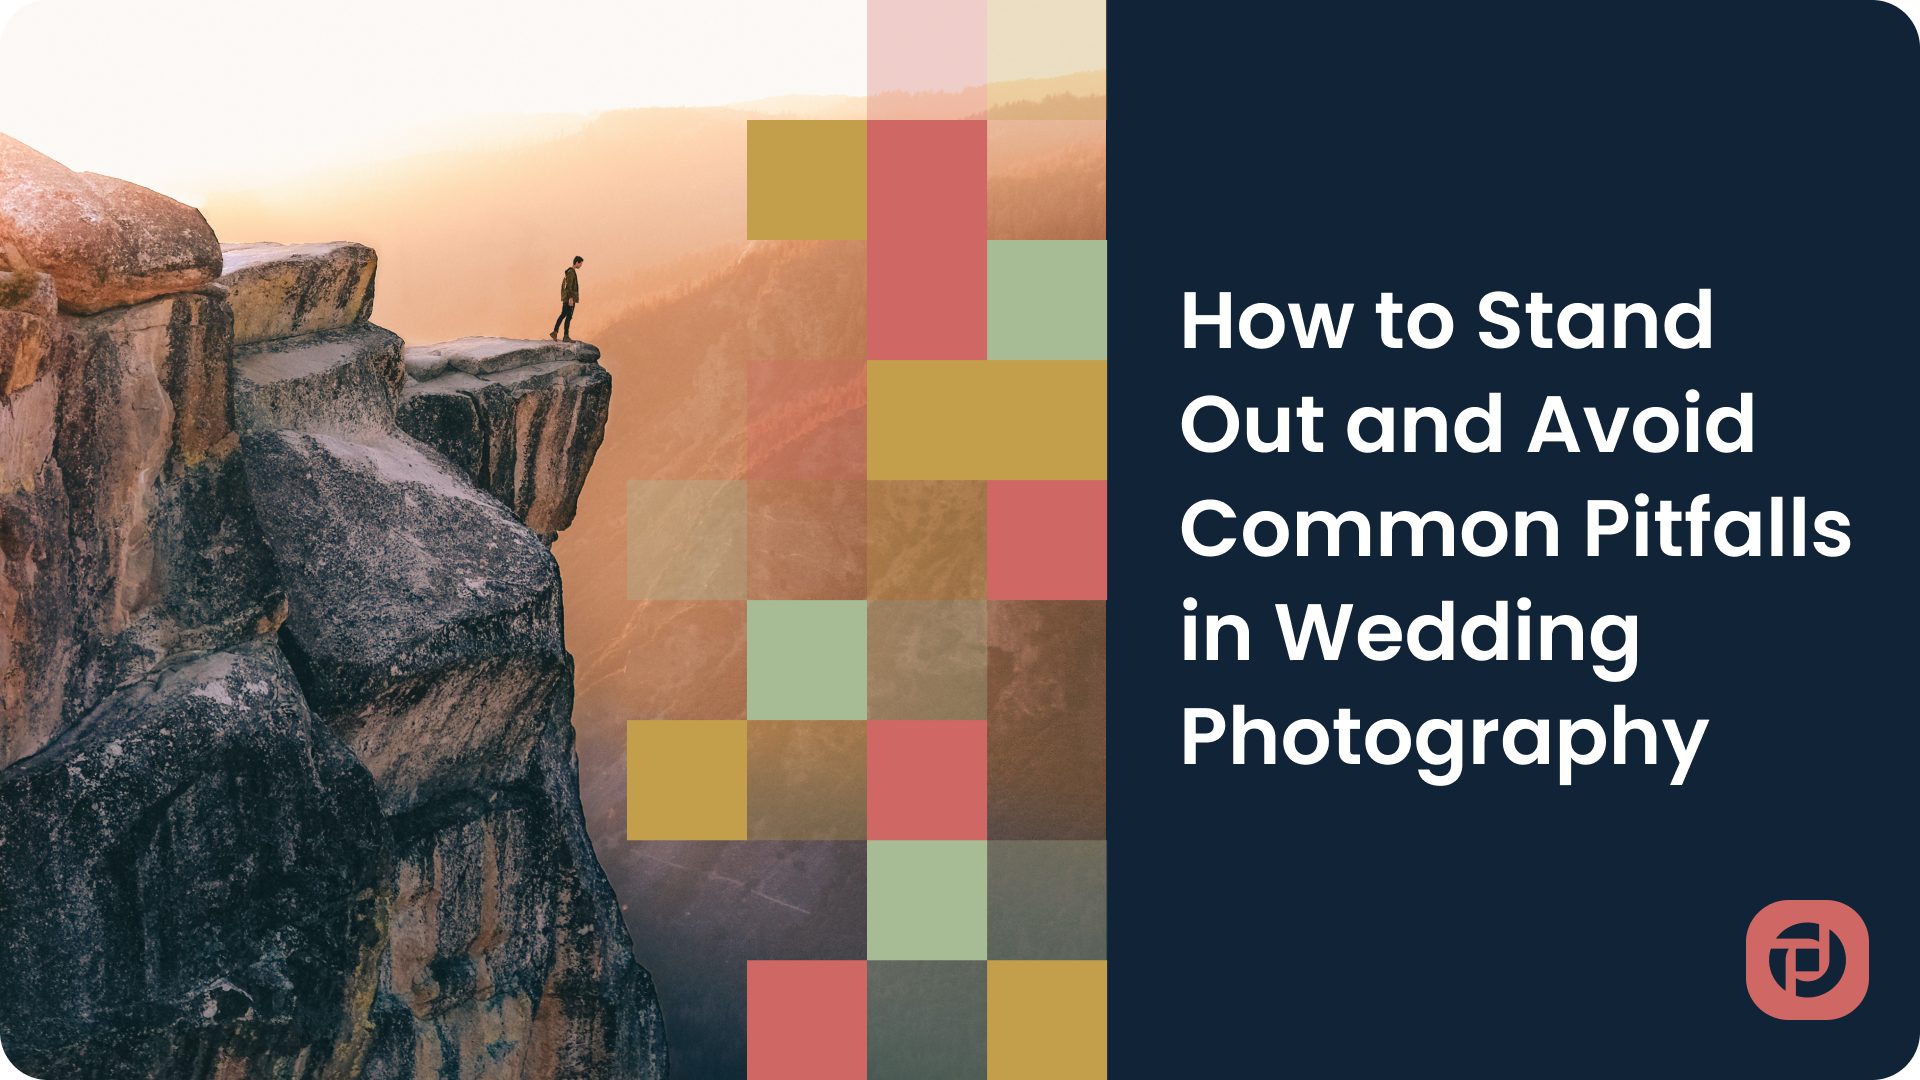 How to Stand Out and Avoid Common Pitfalls in Wedding Photography